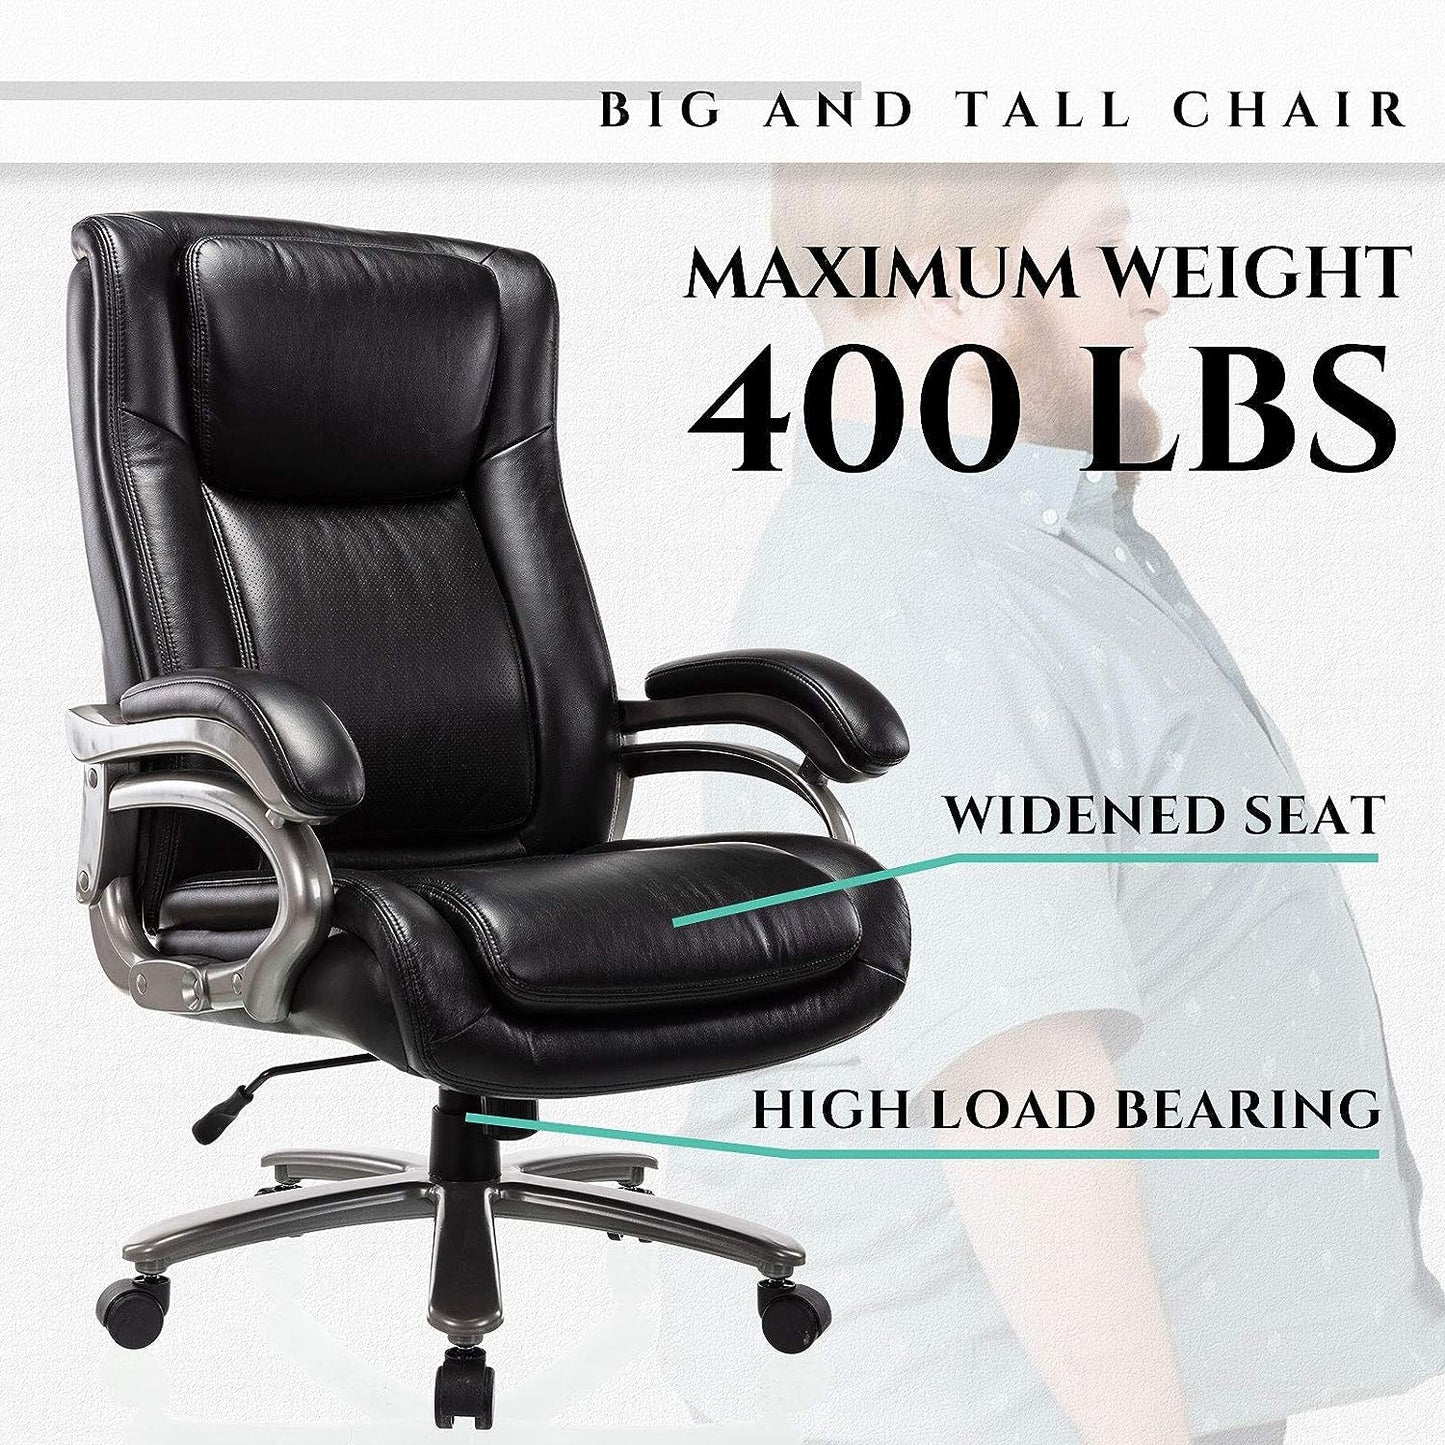 Big & Tall 400lb Office Chair - High Back Executive Computer Chair Heavy Duty Metal Base and Adjustable Tilt Angle Large Bonded Leather Desk Swivel Chair, Ergonomic Design for Lumbar Support